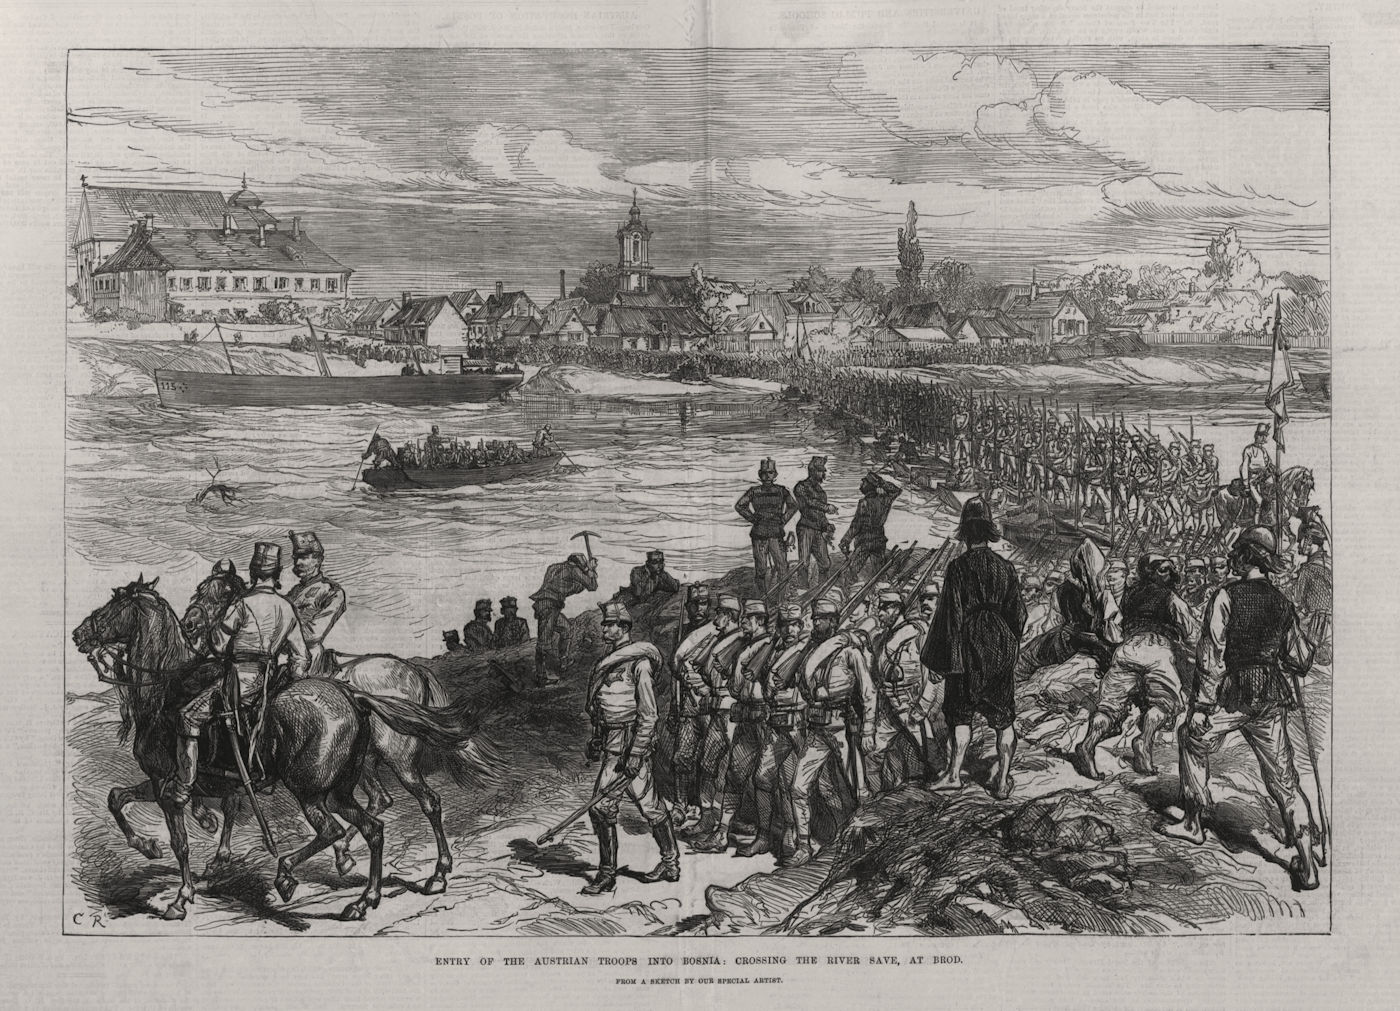 Associate Product Austrian troops entering Bosnia: Crossing the river Sava, at Brod 1878